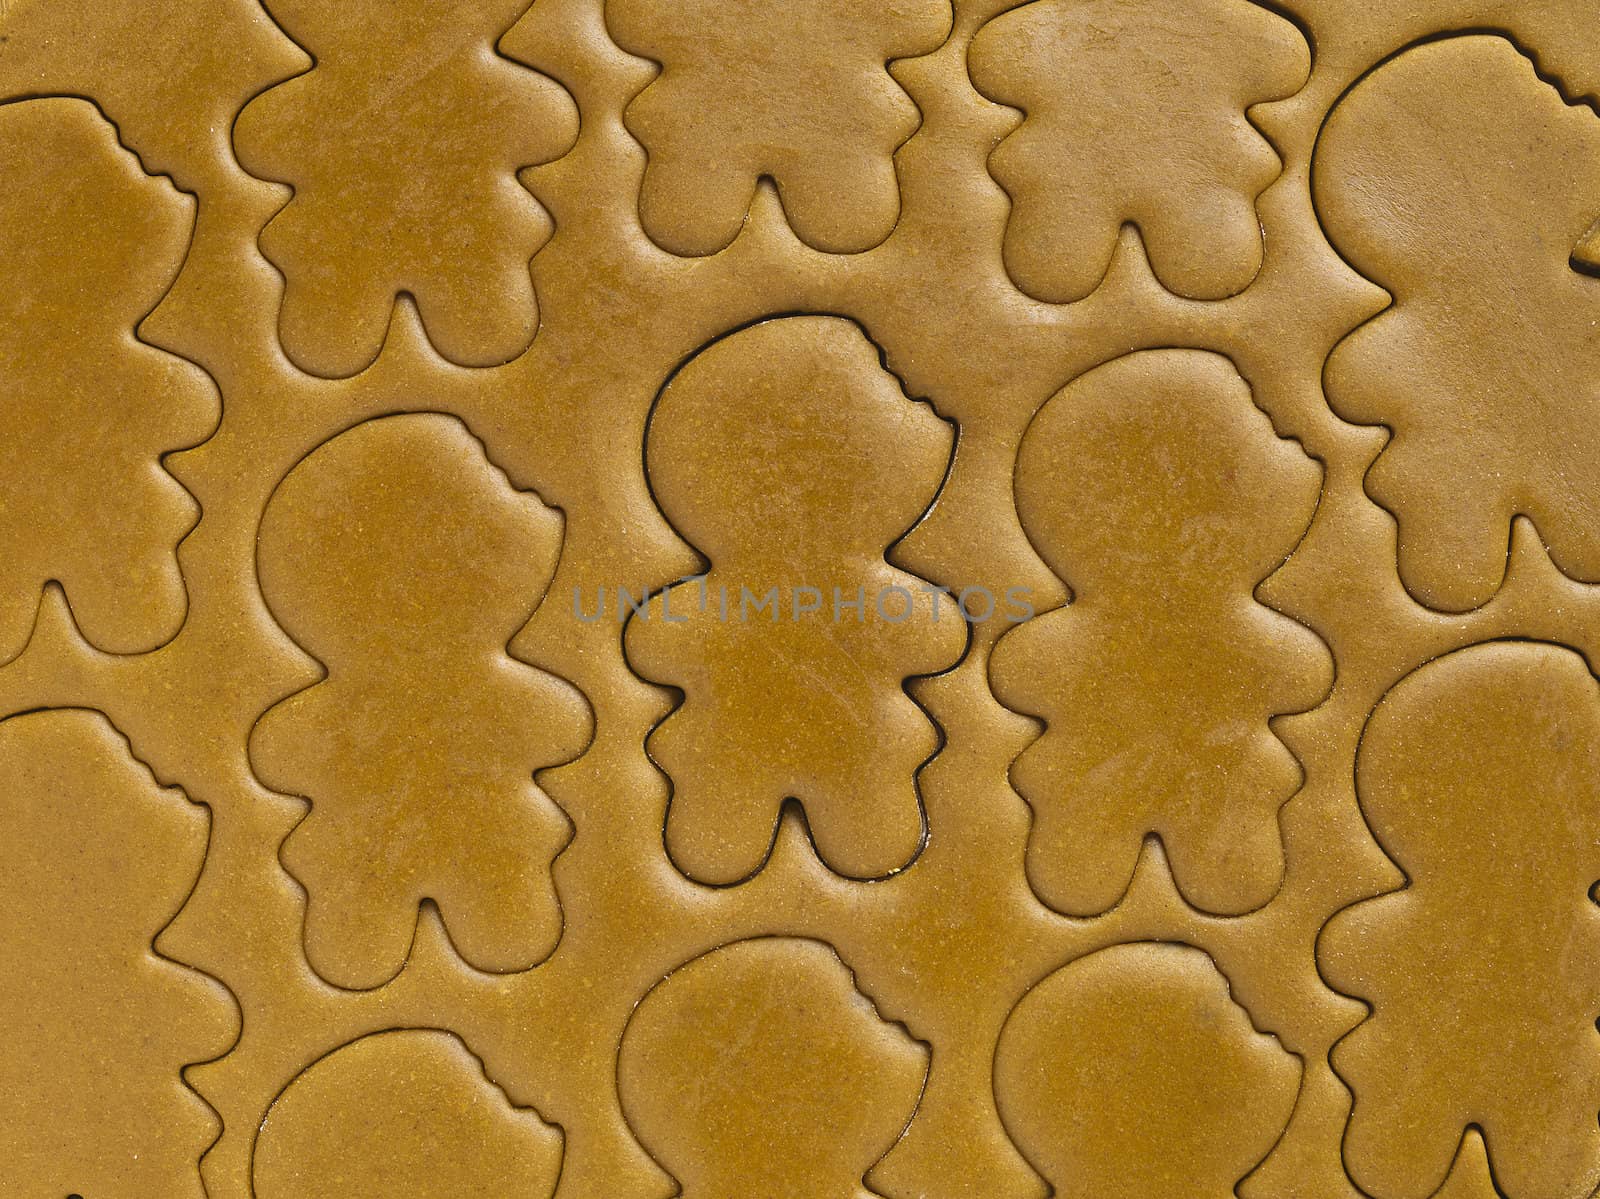 Close-up shot of gingerbread man shapes on gingerbread dough.